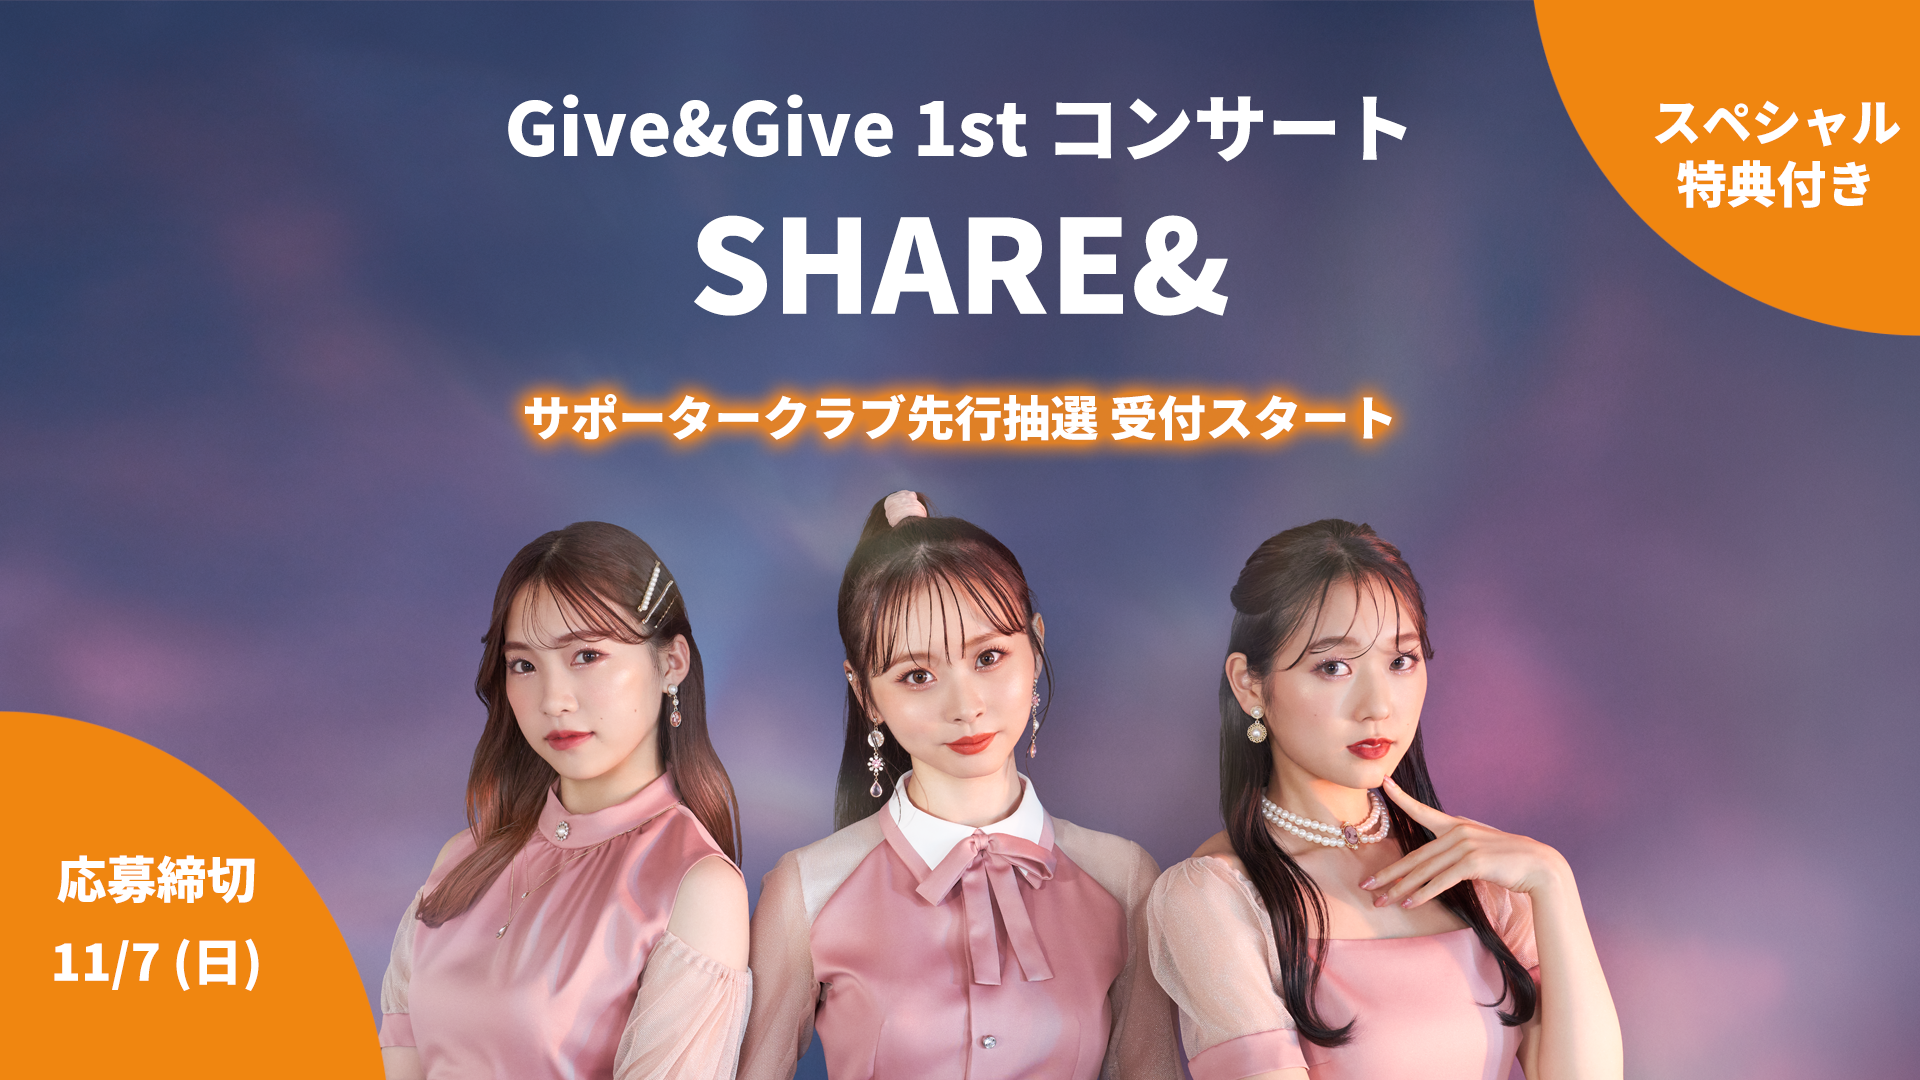 Give&Give 1stコンサート「SHARE&」サポータークラブ先行抽選受付を開始